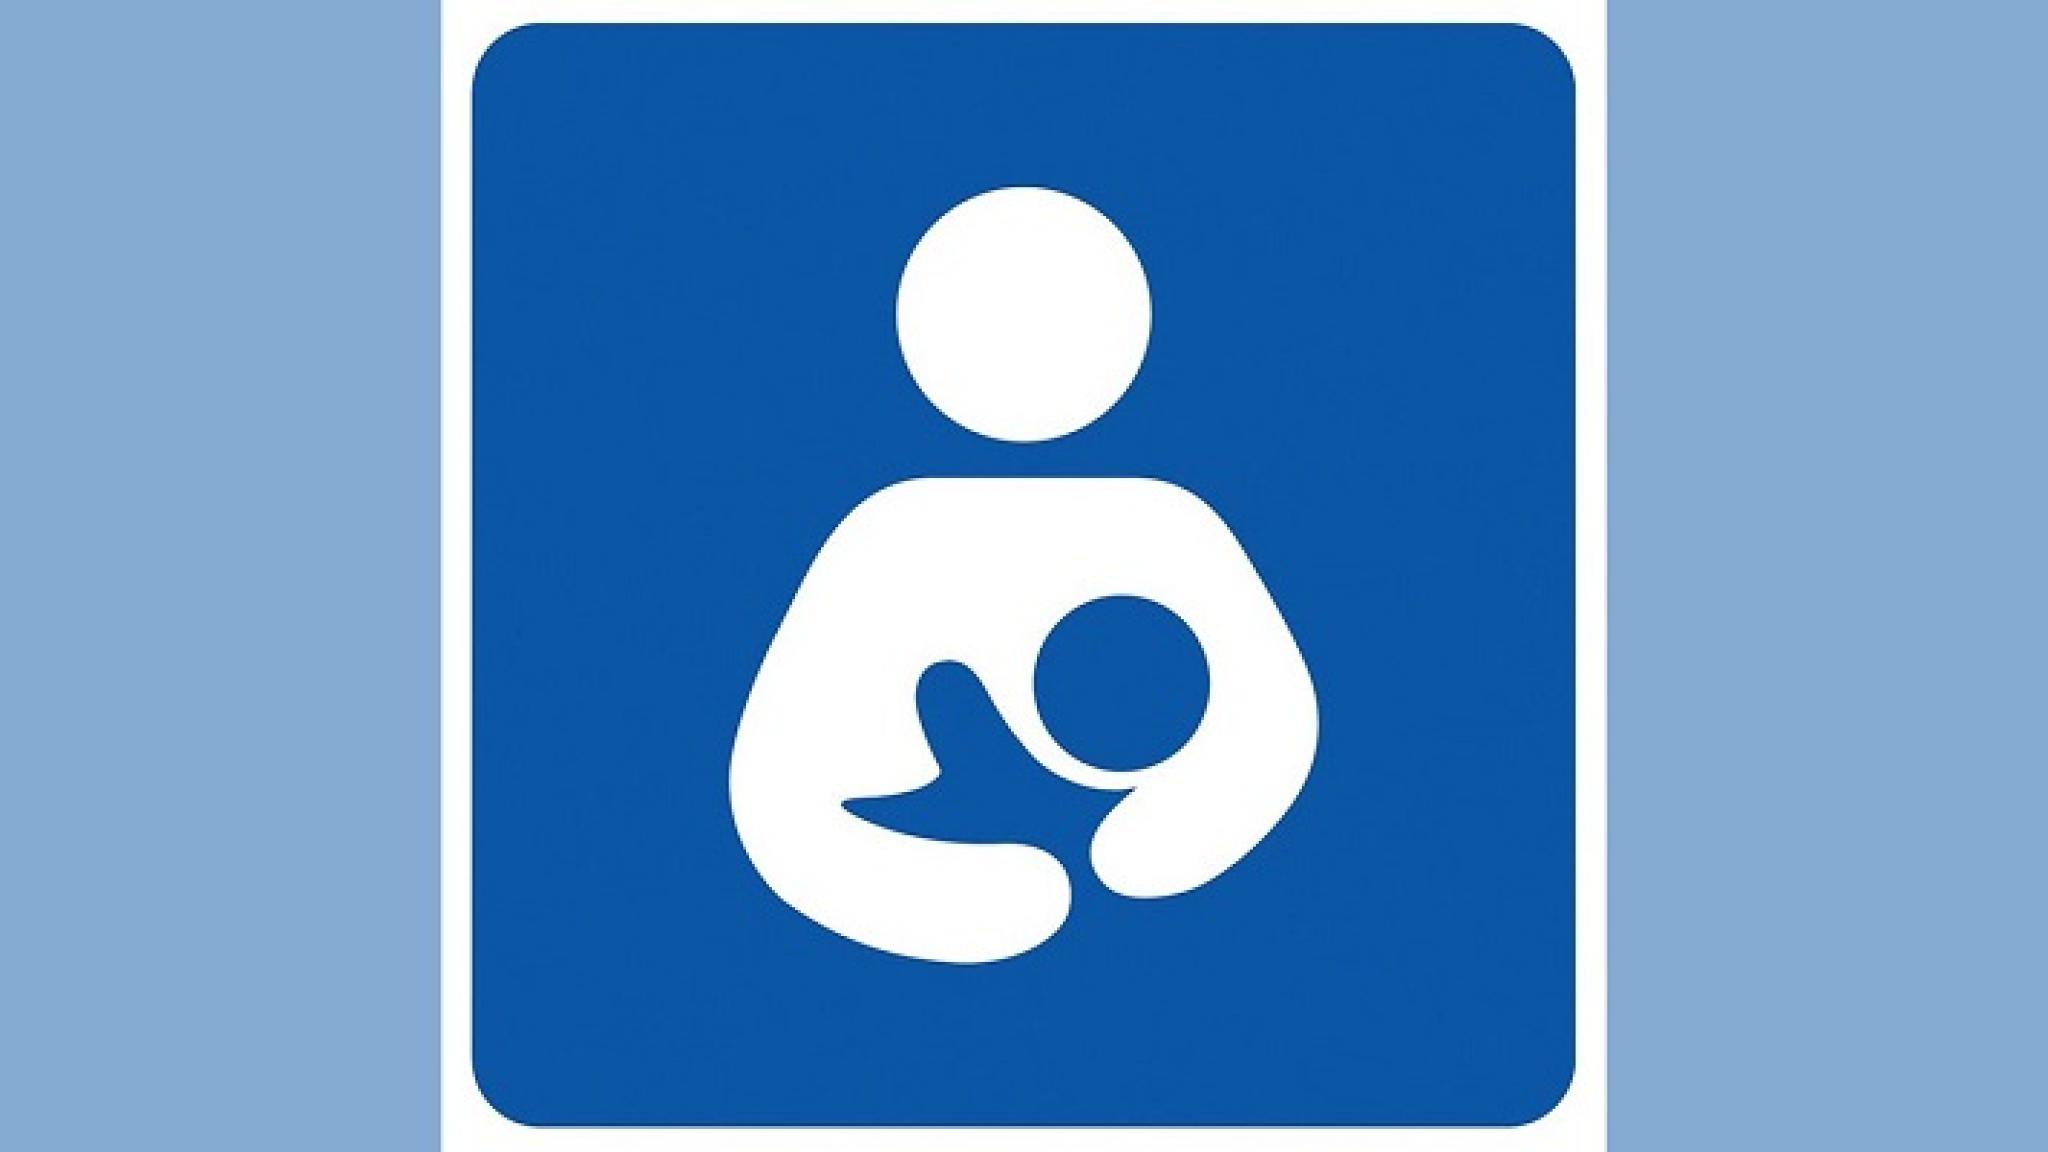 International Breastfeeding symbol from https://flic.kr/p/sP2xA by Rob https://www.flickr.com/photos/topinambour/, used under CC BY-NC-ND 2.0 licence 